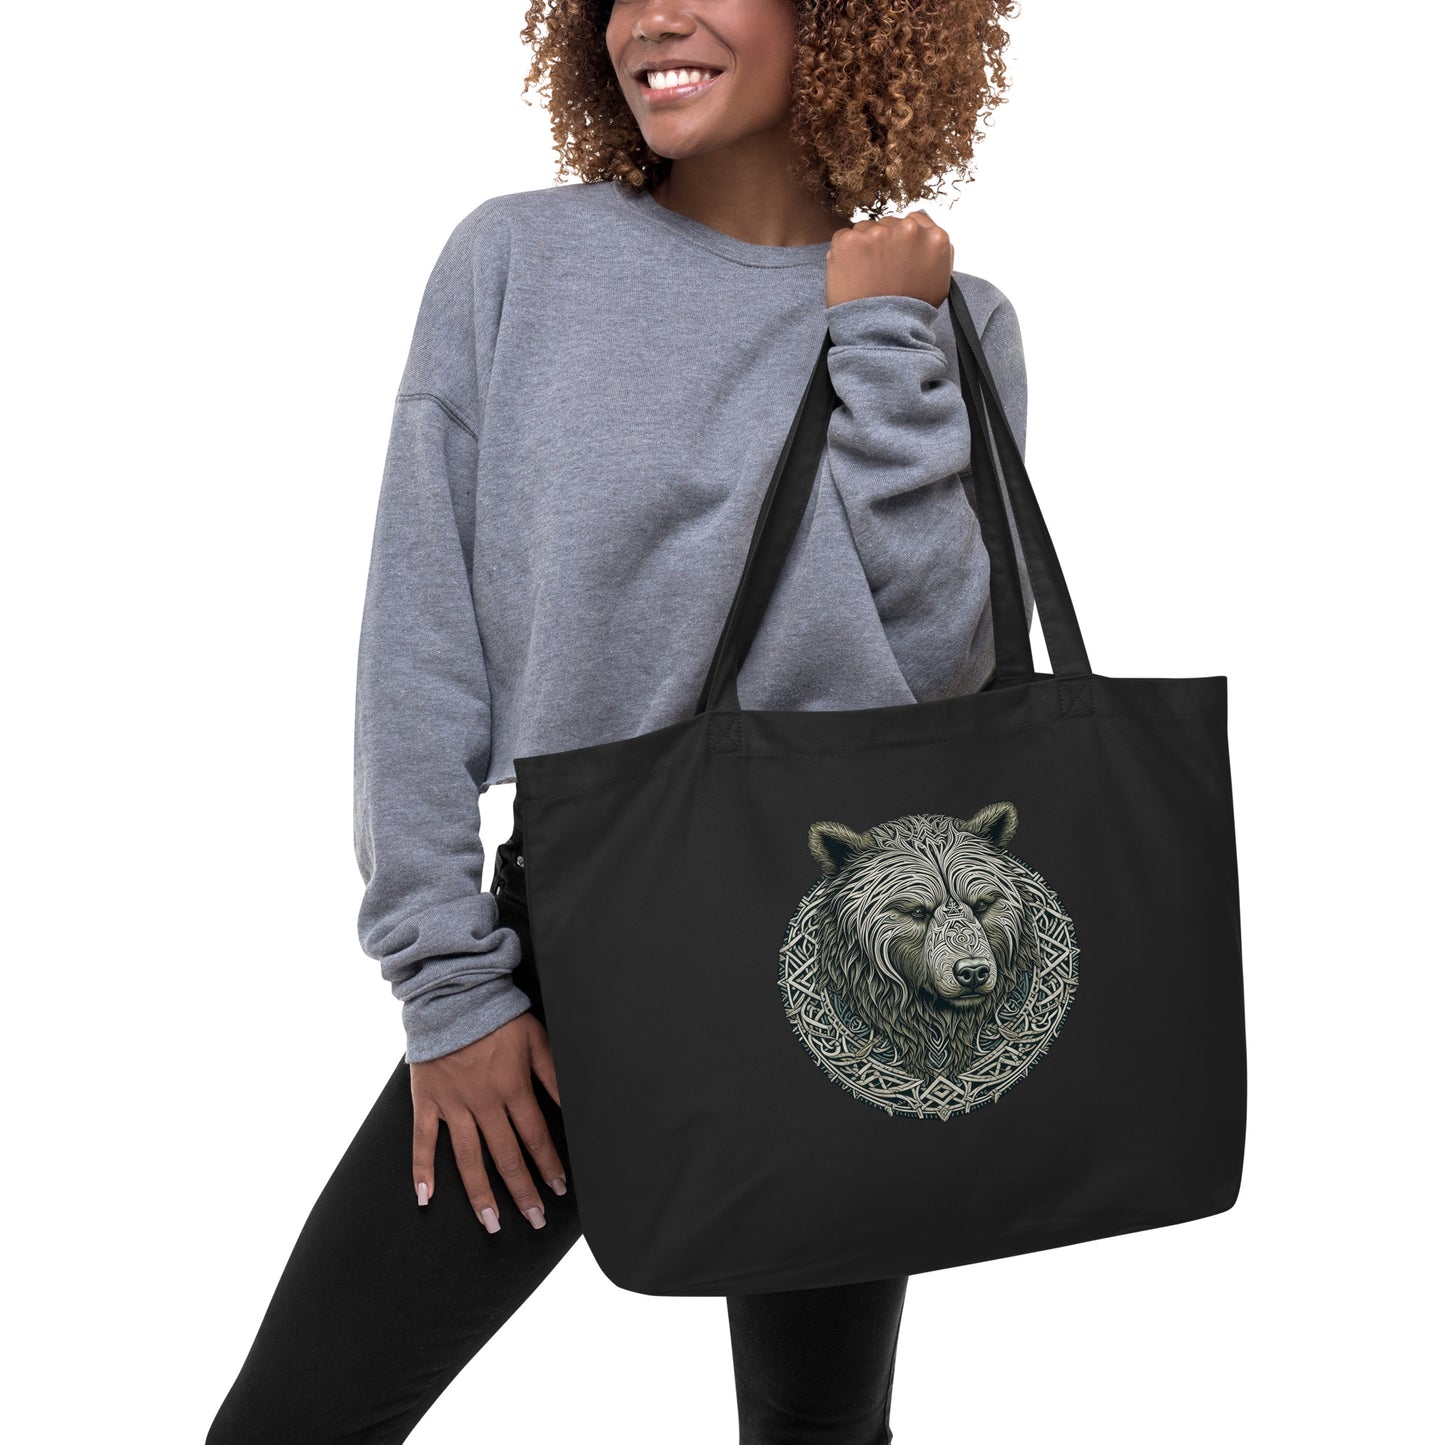 Norse Knotwork Grizzly Bear Large organic tote bag